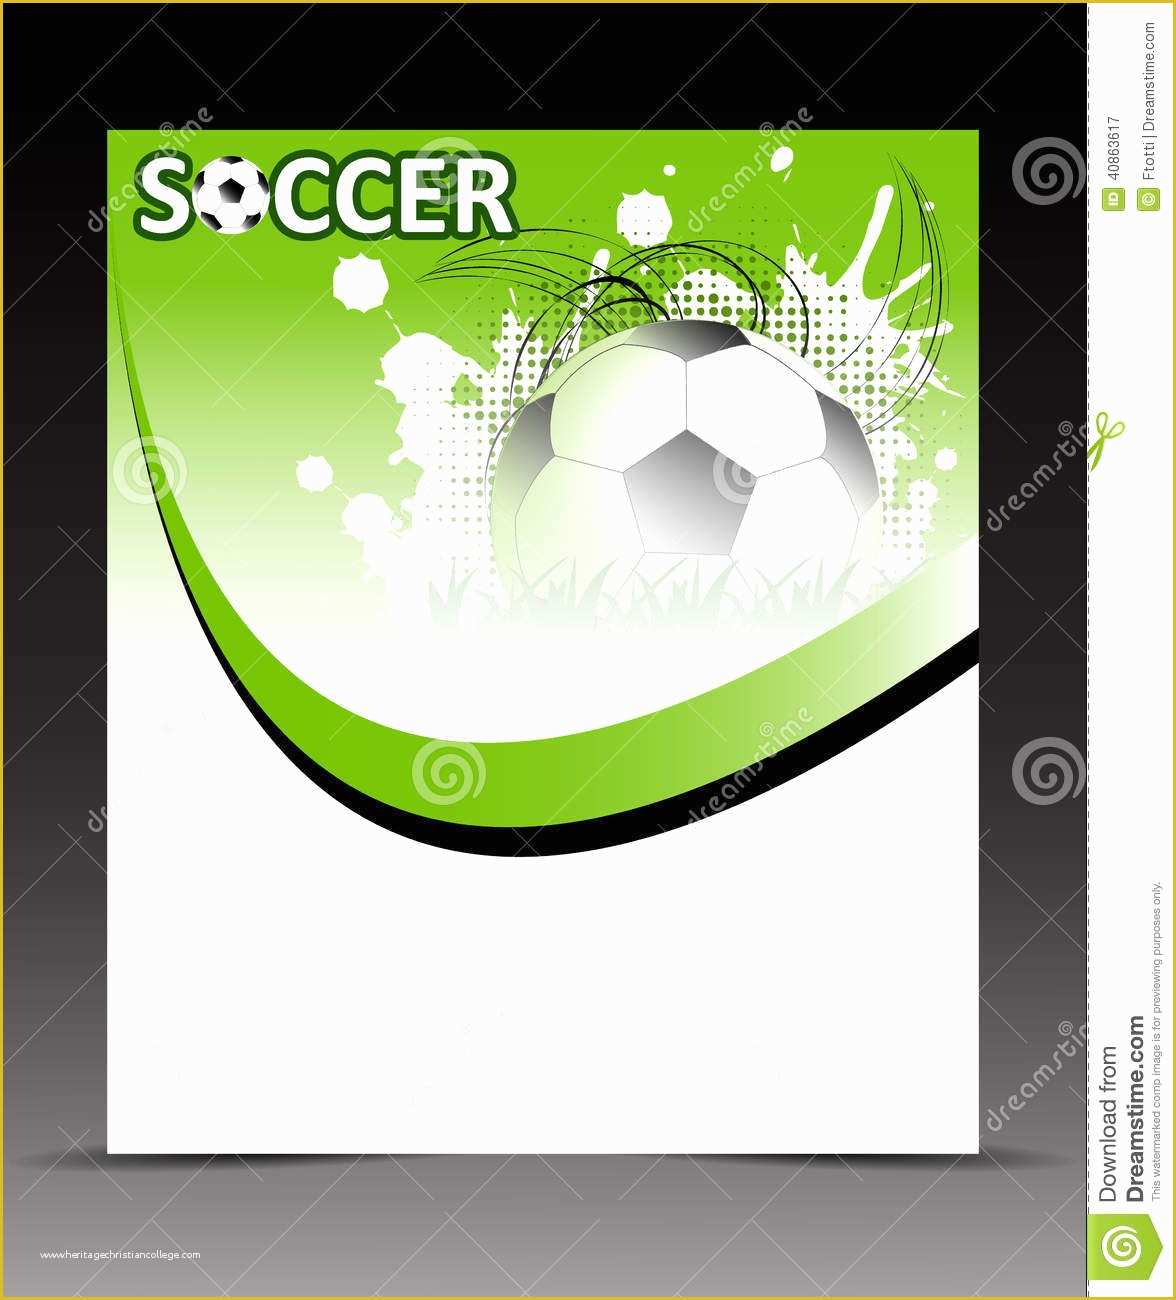 Soccer Flyer Template Free Of Template Flyer with soccer Ball Abstract Background